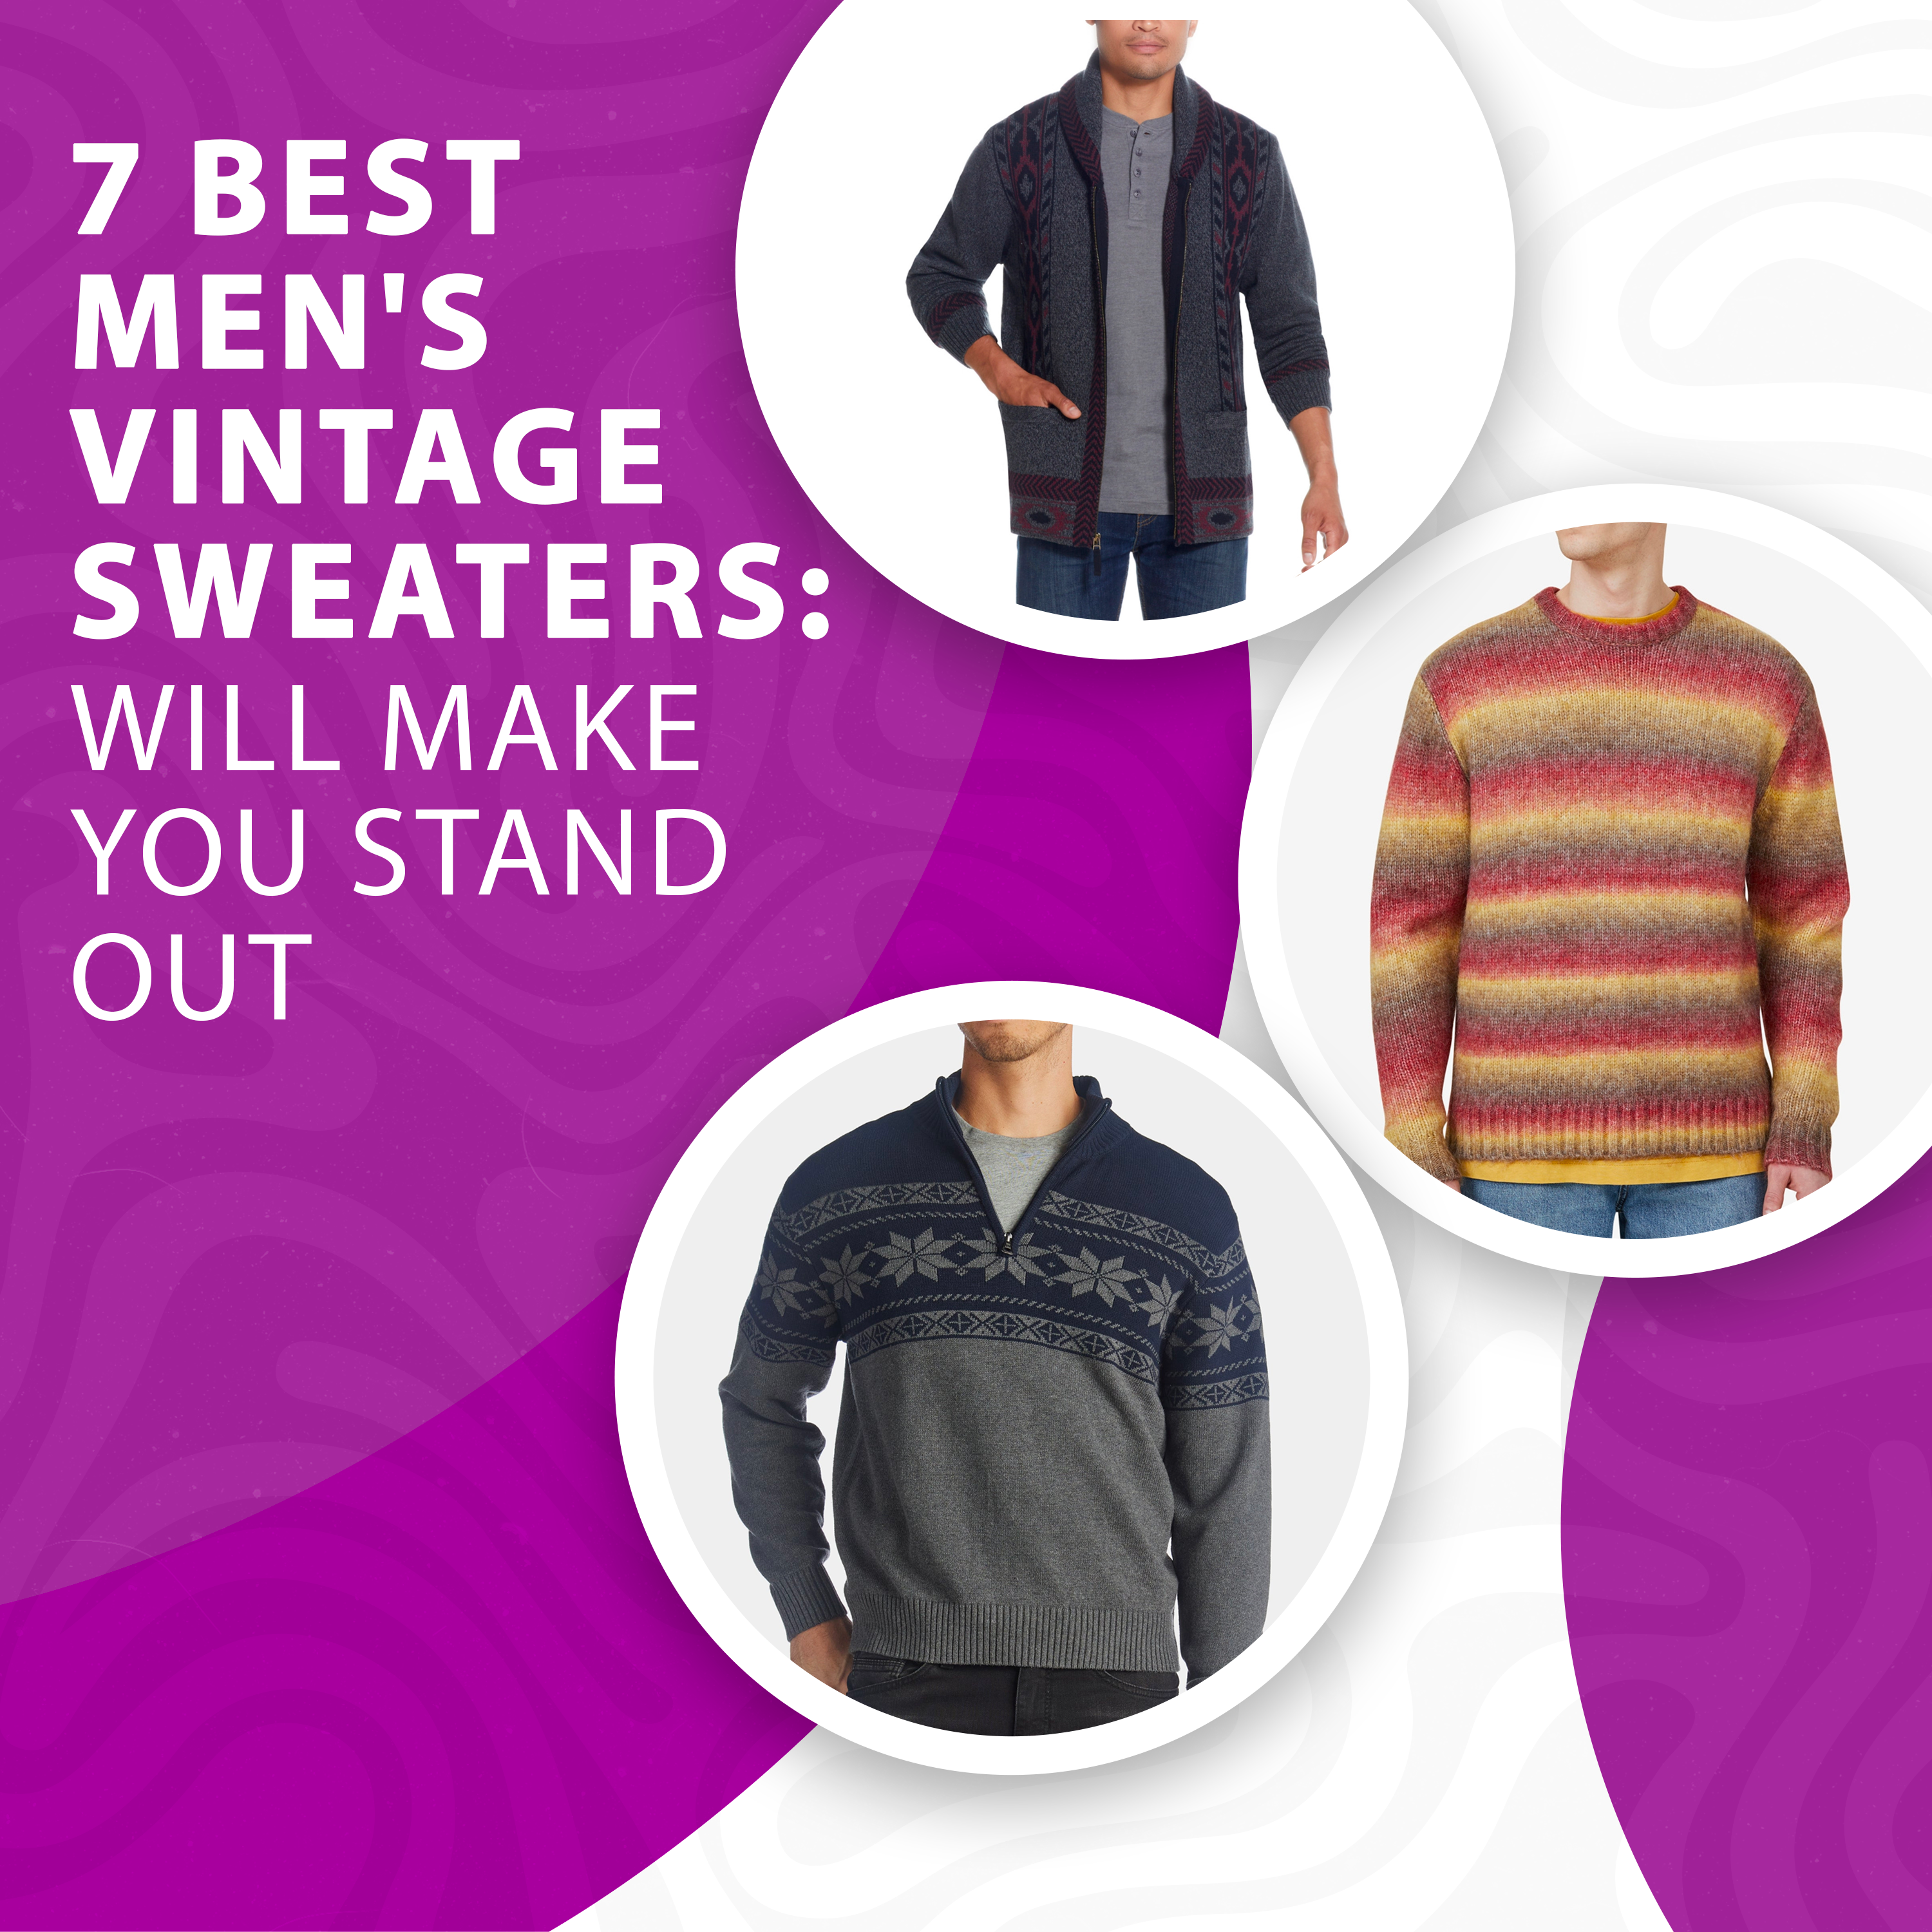 7 Best Men’s Vintage Sweaters: Will Make You Stand Out